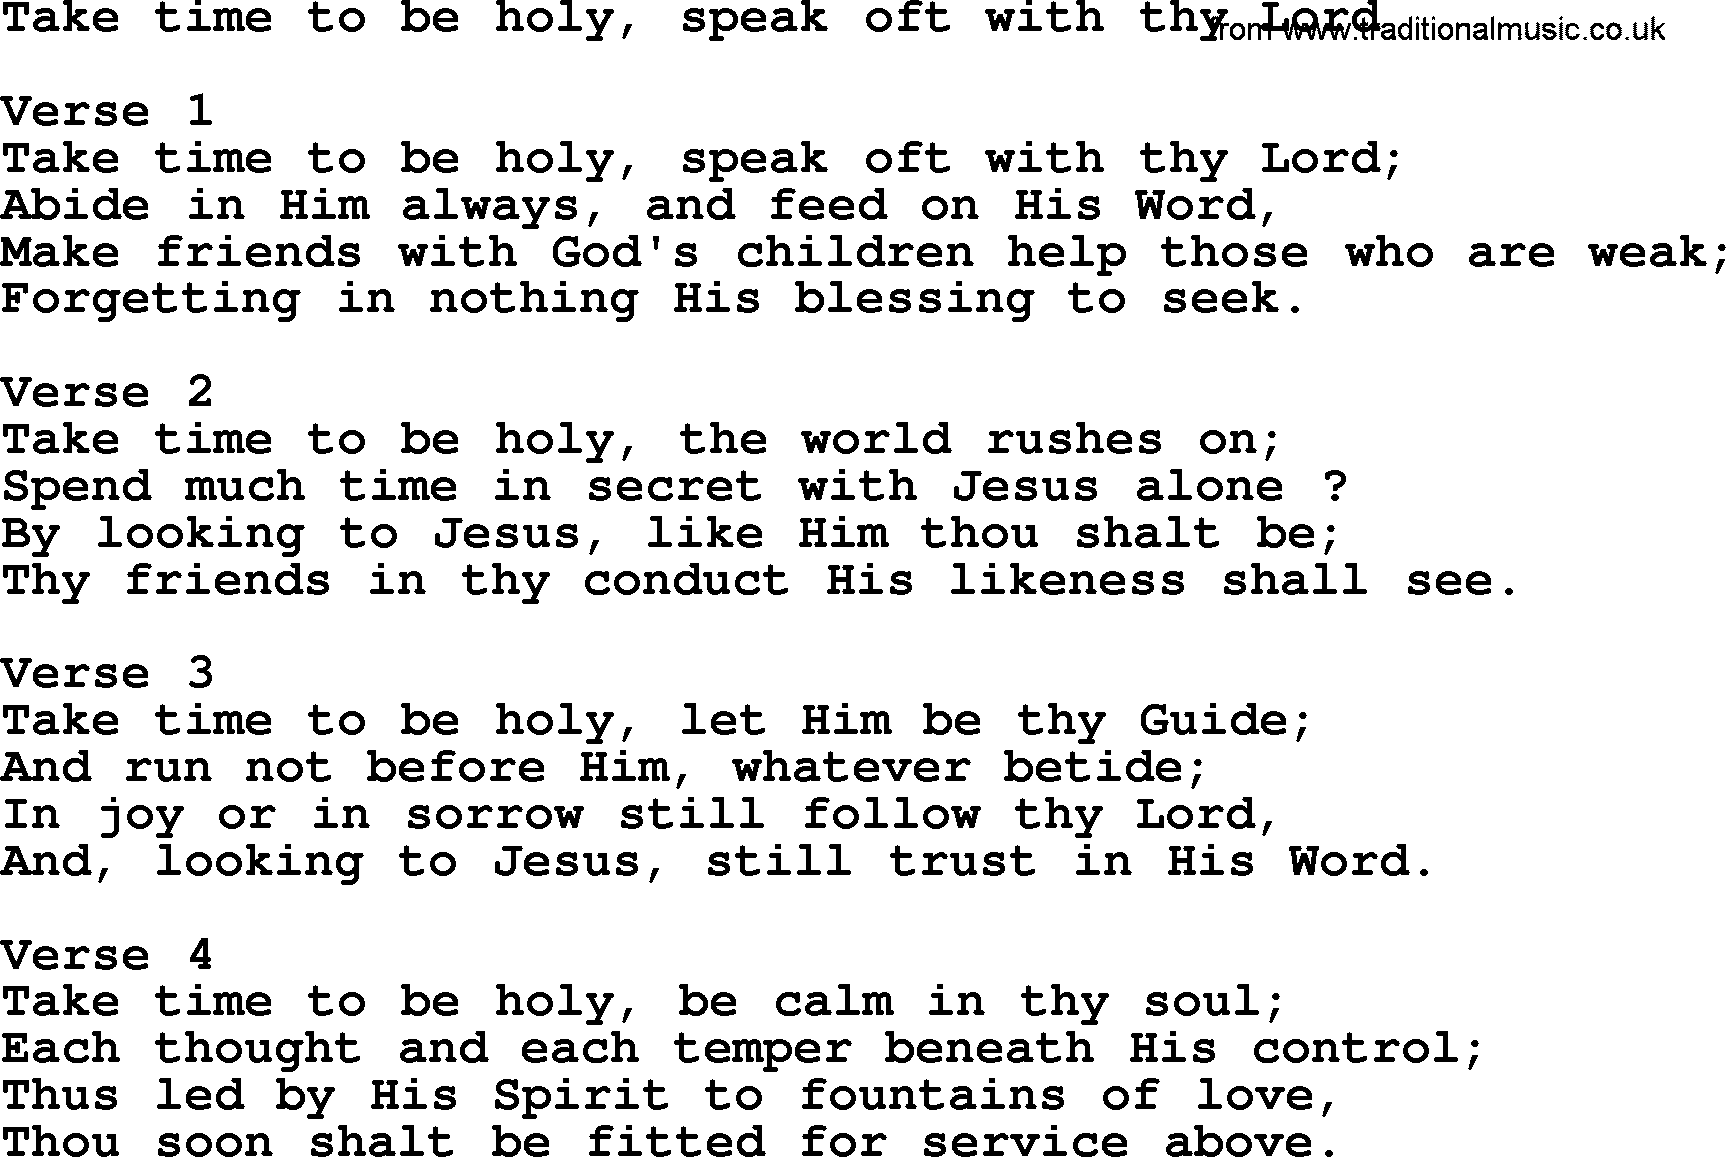 Apostolic and Pentecostal Hymns and Gospel Songs, Hymn: Take Time To Be Holy, Speak Oft With Thy Lord, Christian lyrics and PDF